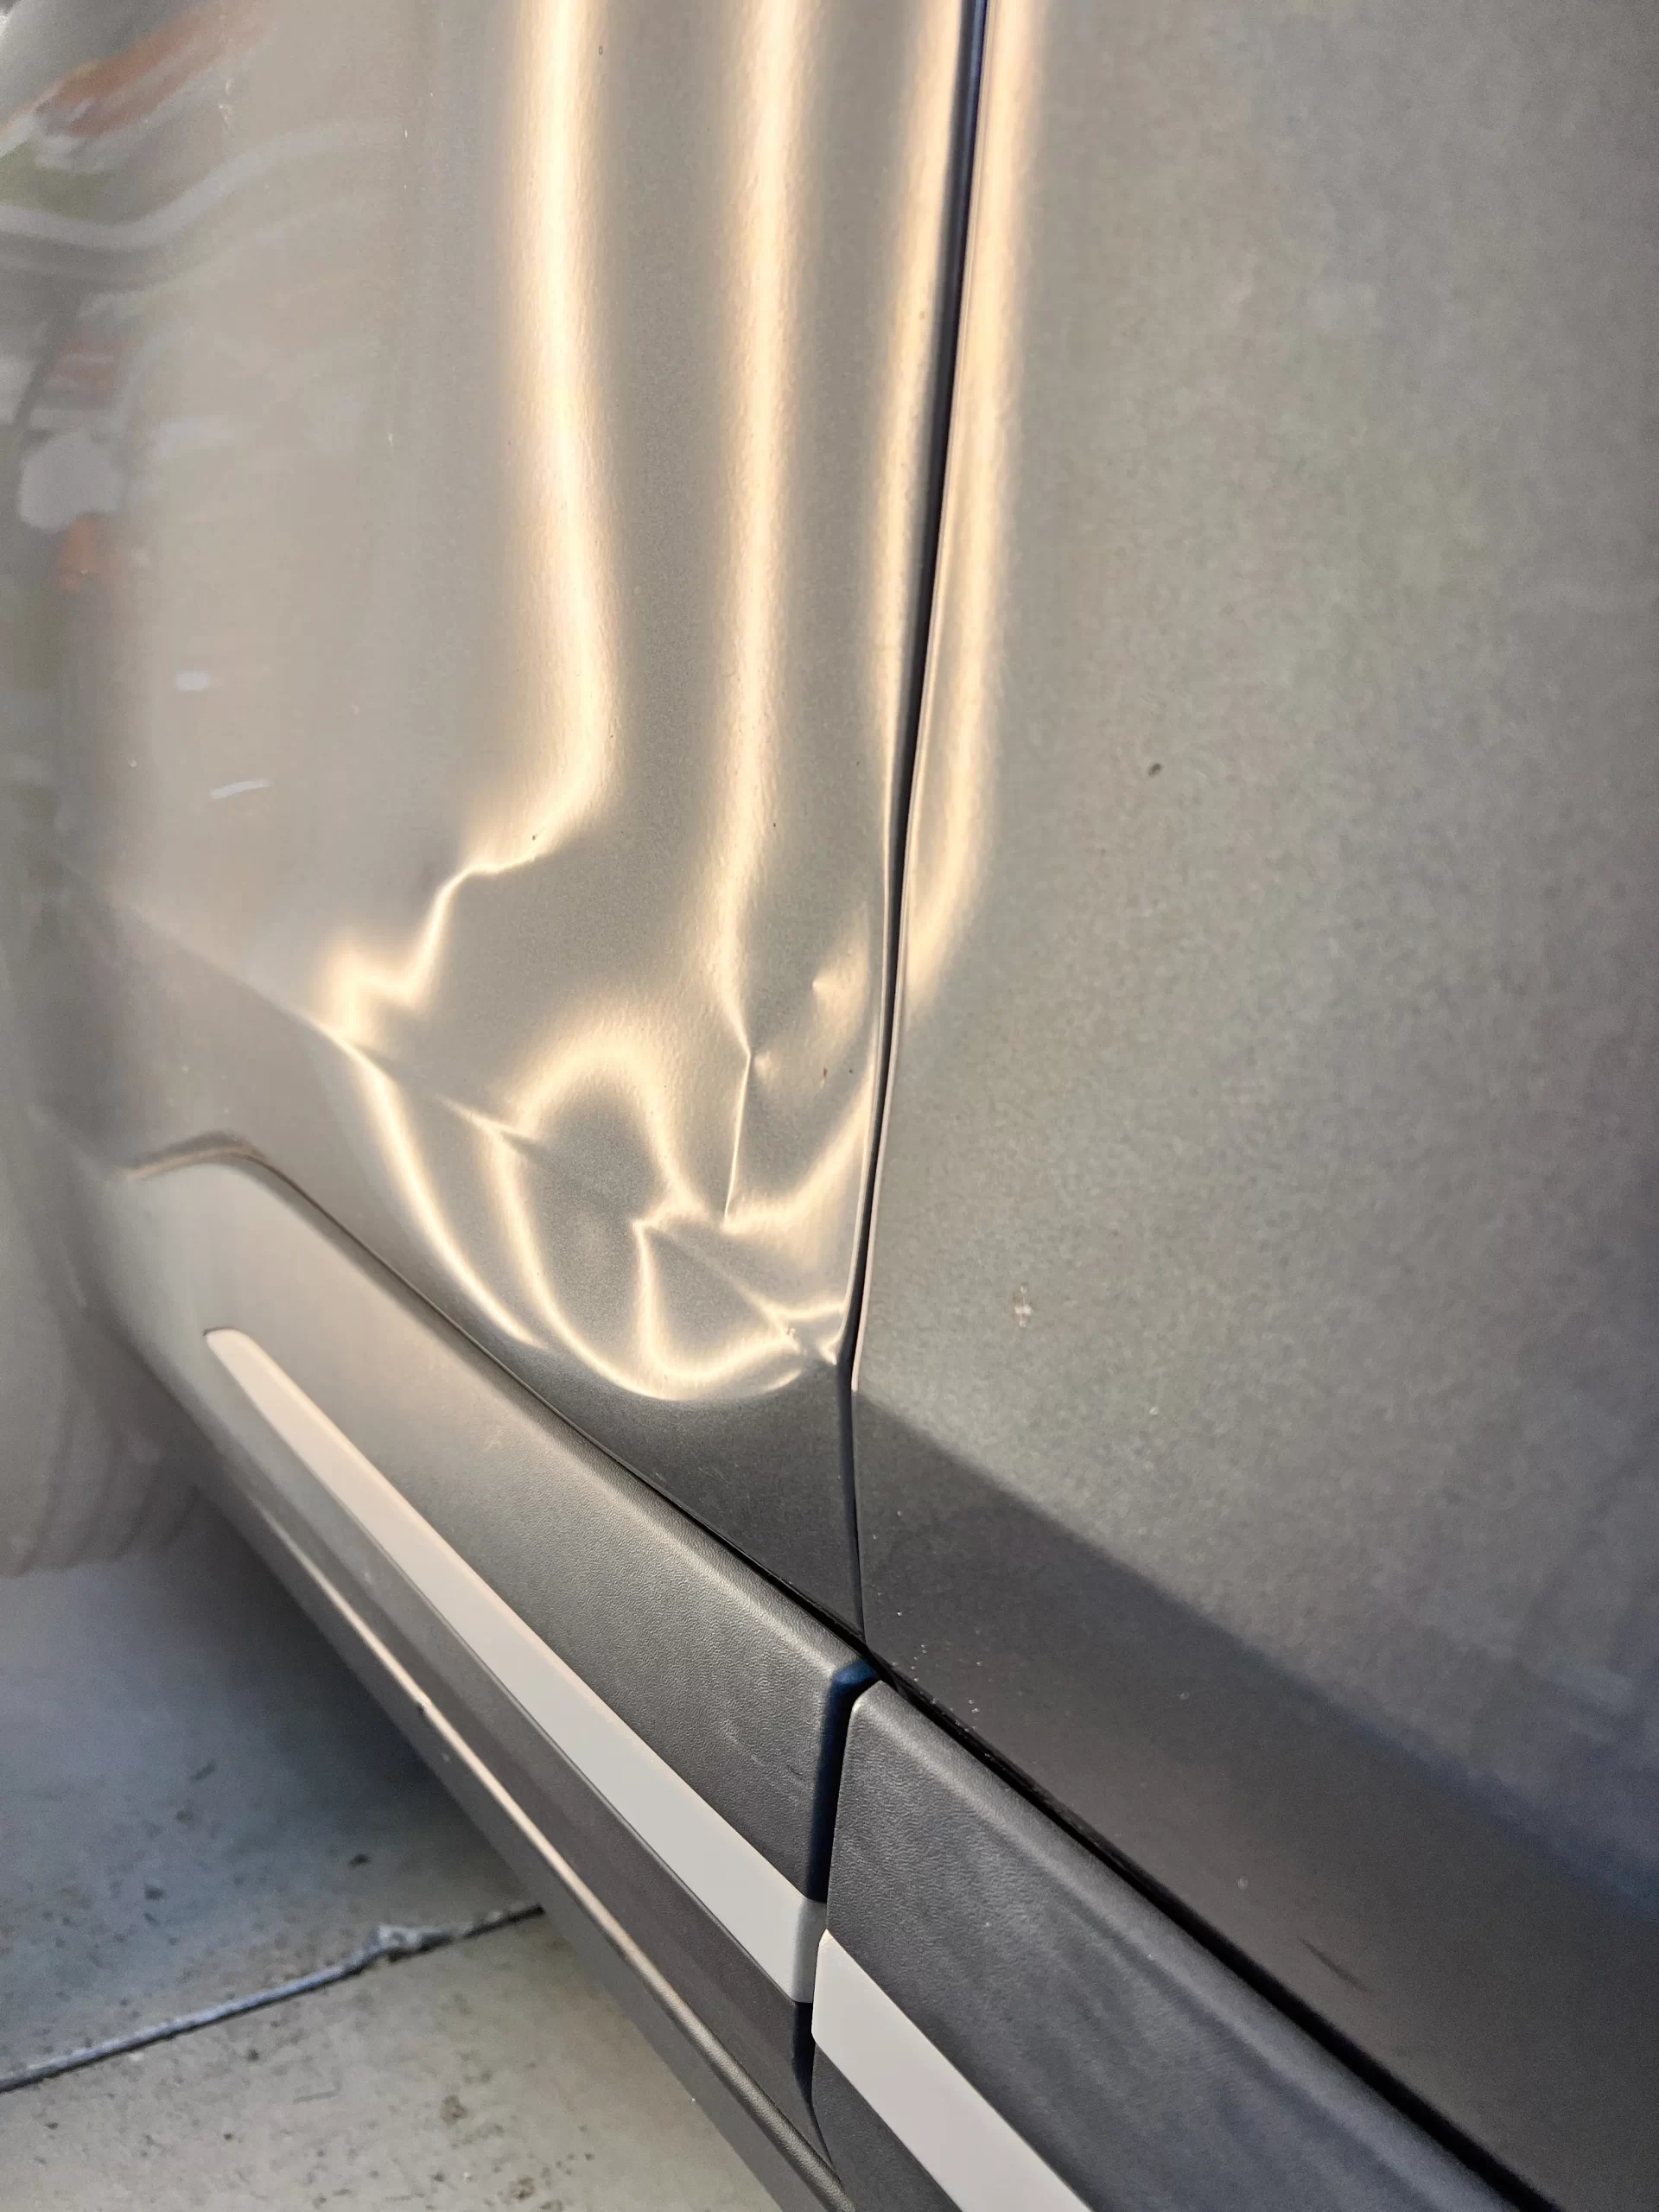 The slightly dented side of a grey vehicle before repairs.